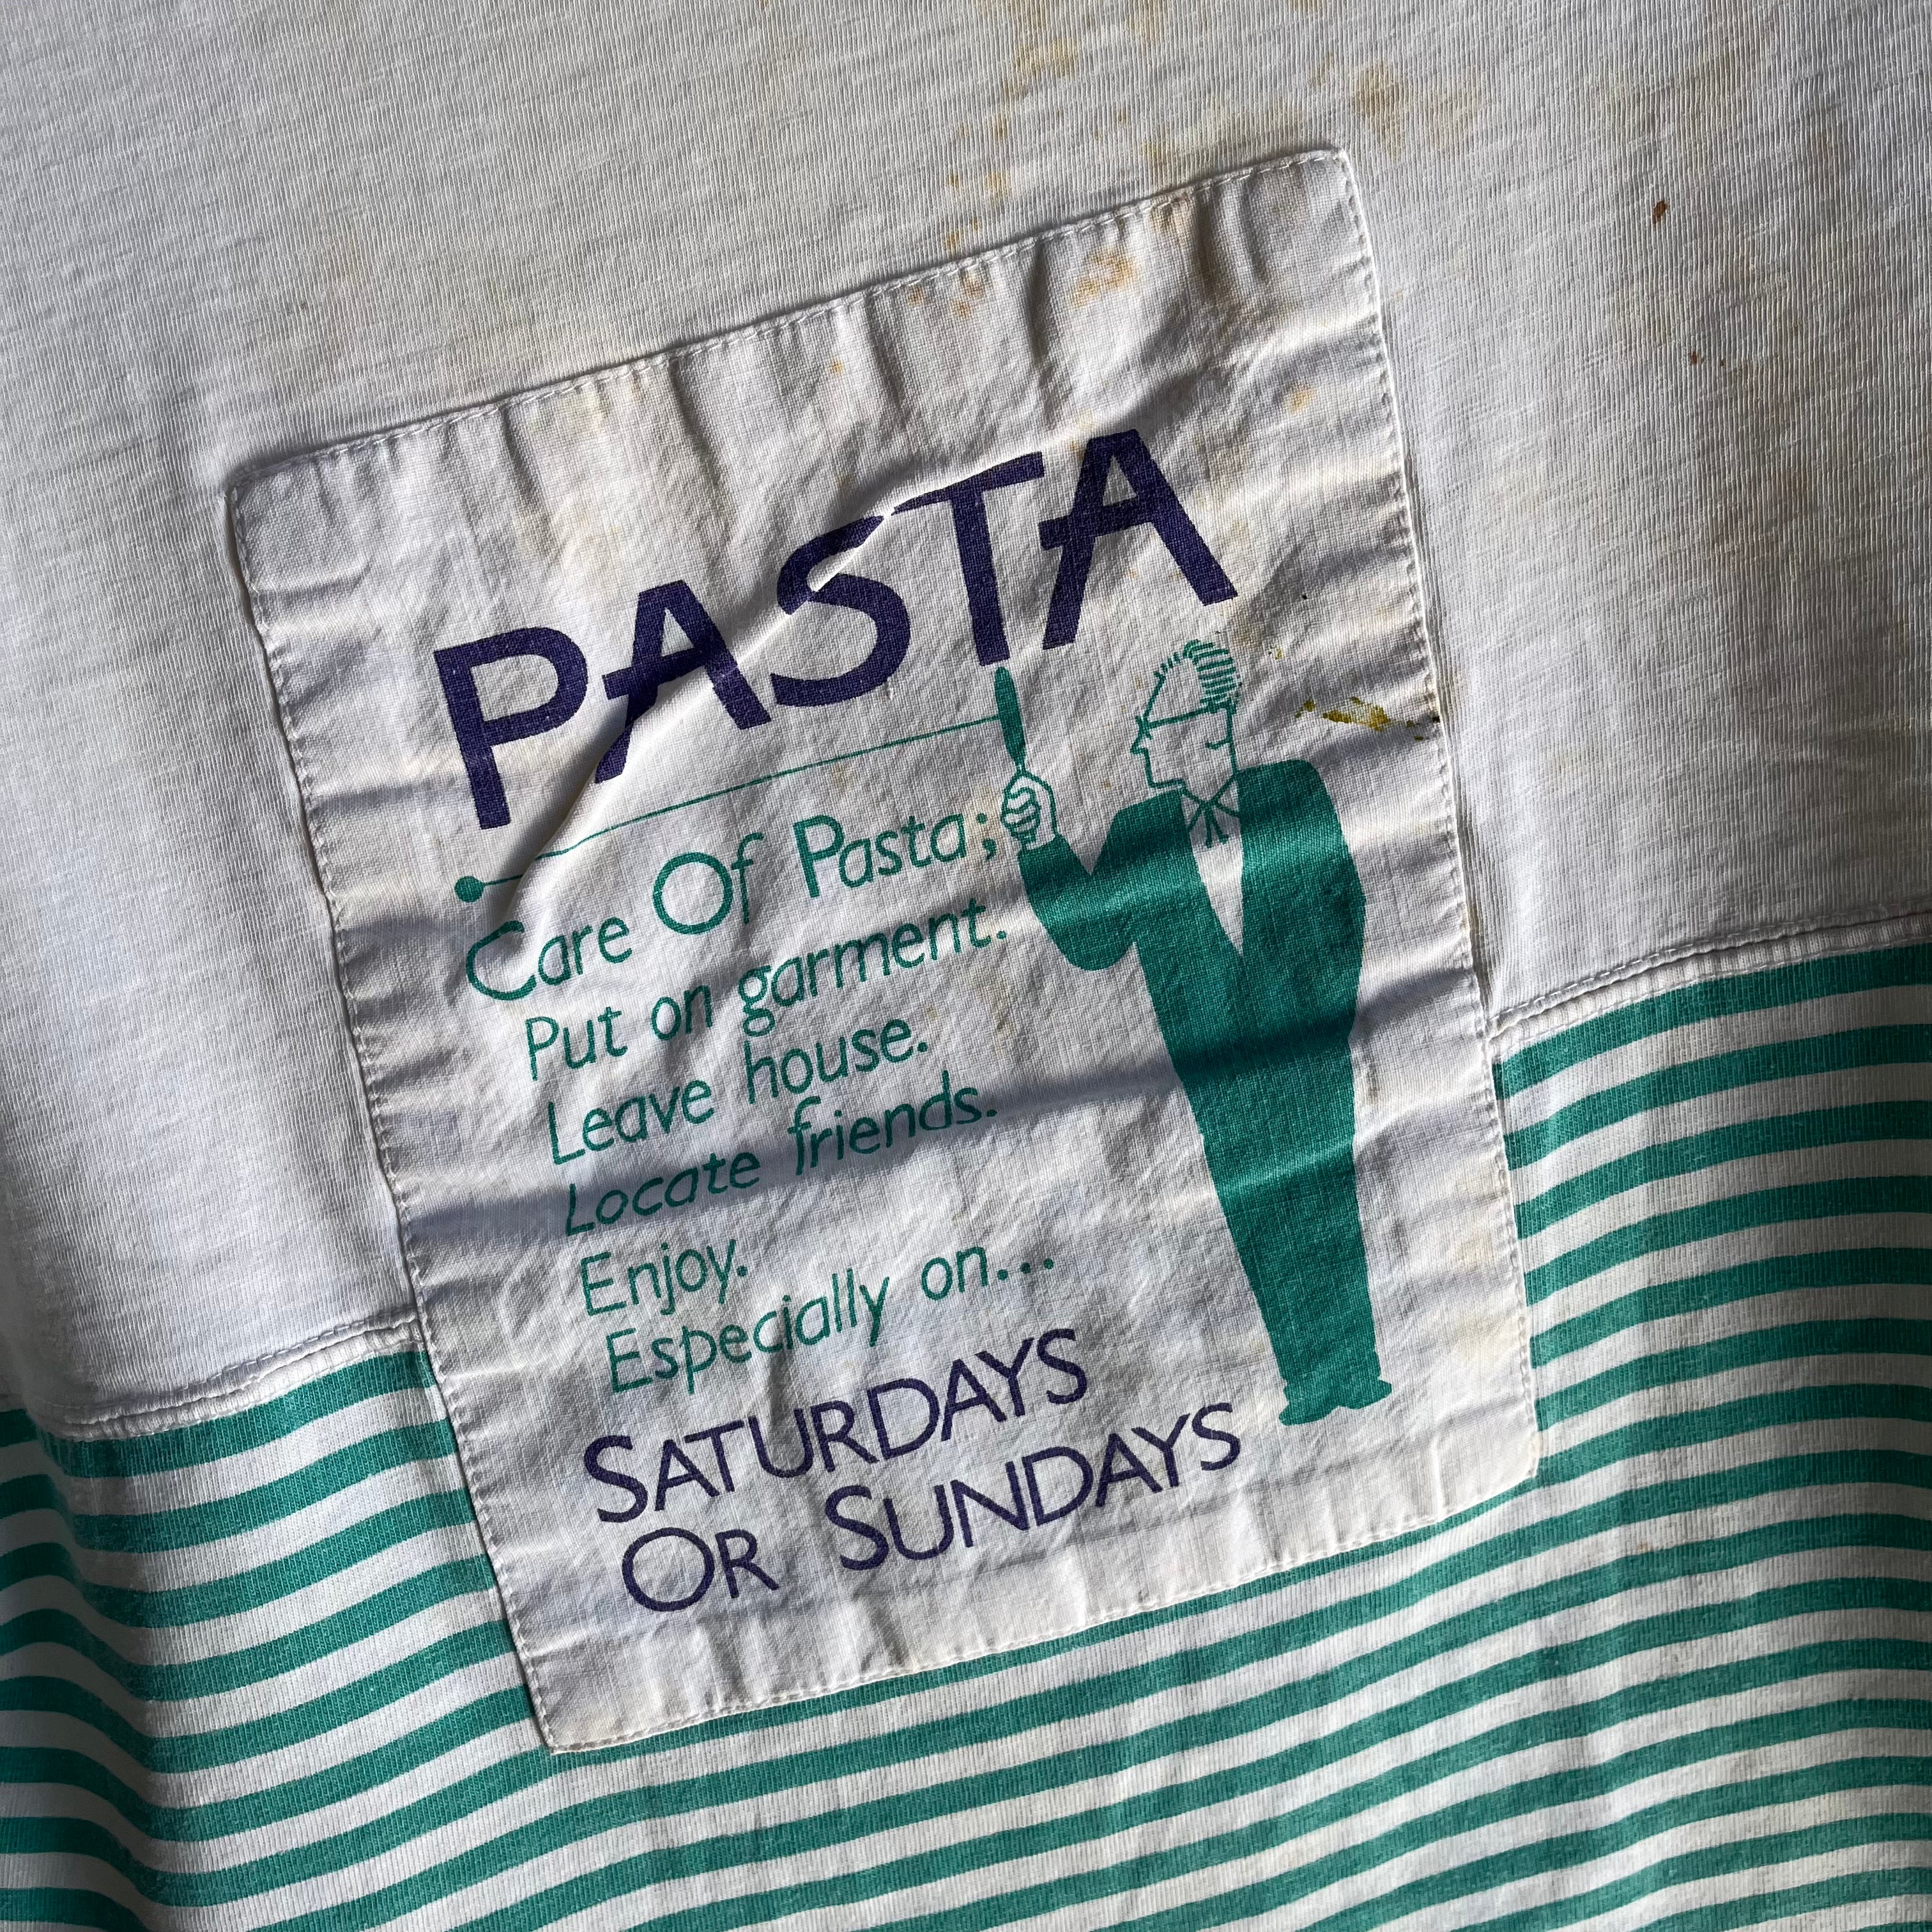 1980s CARE OF PASTA - PASTA STAINED CROP - OMFG!!!